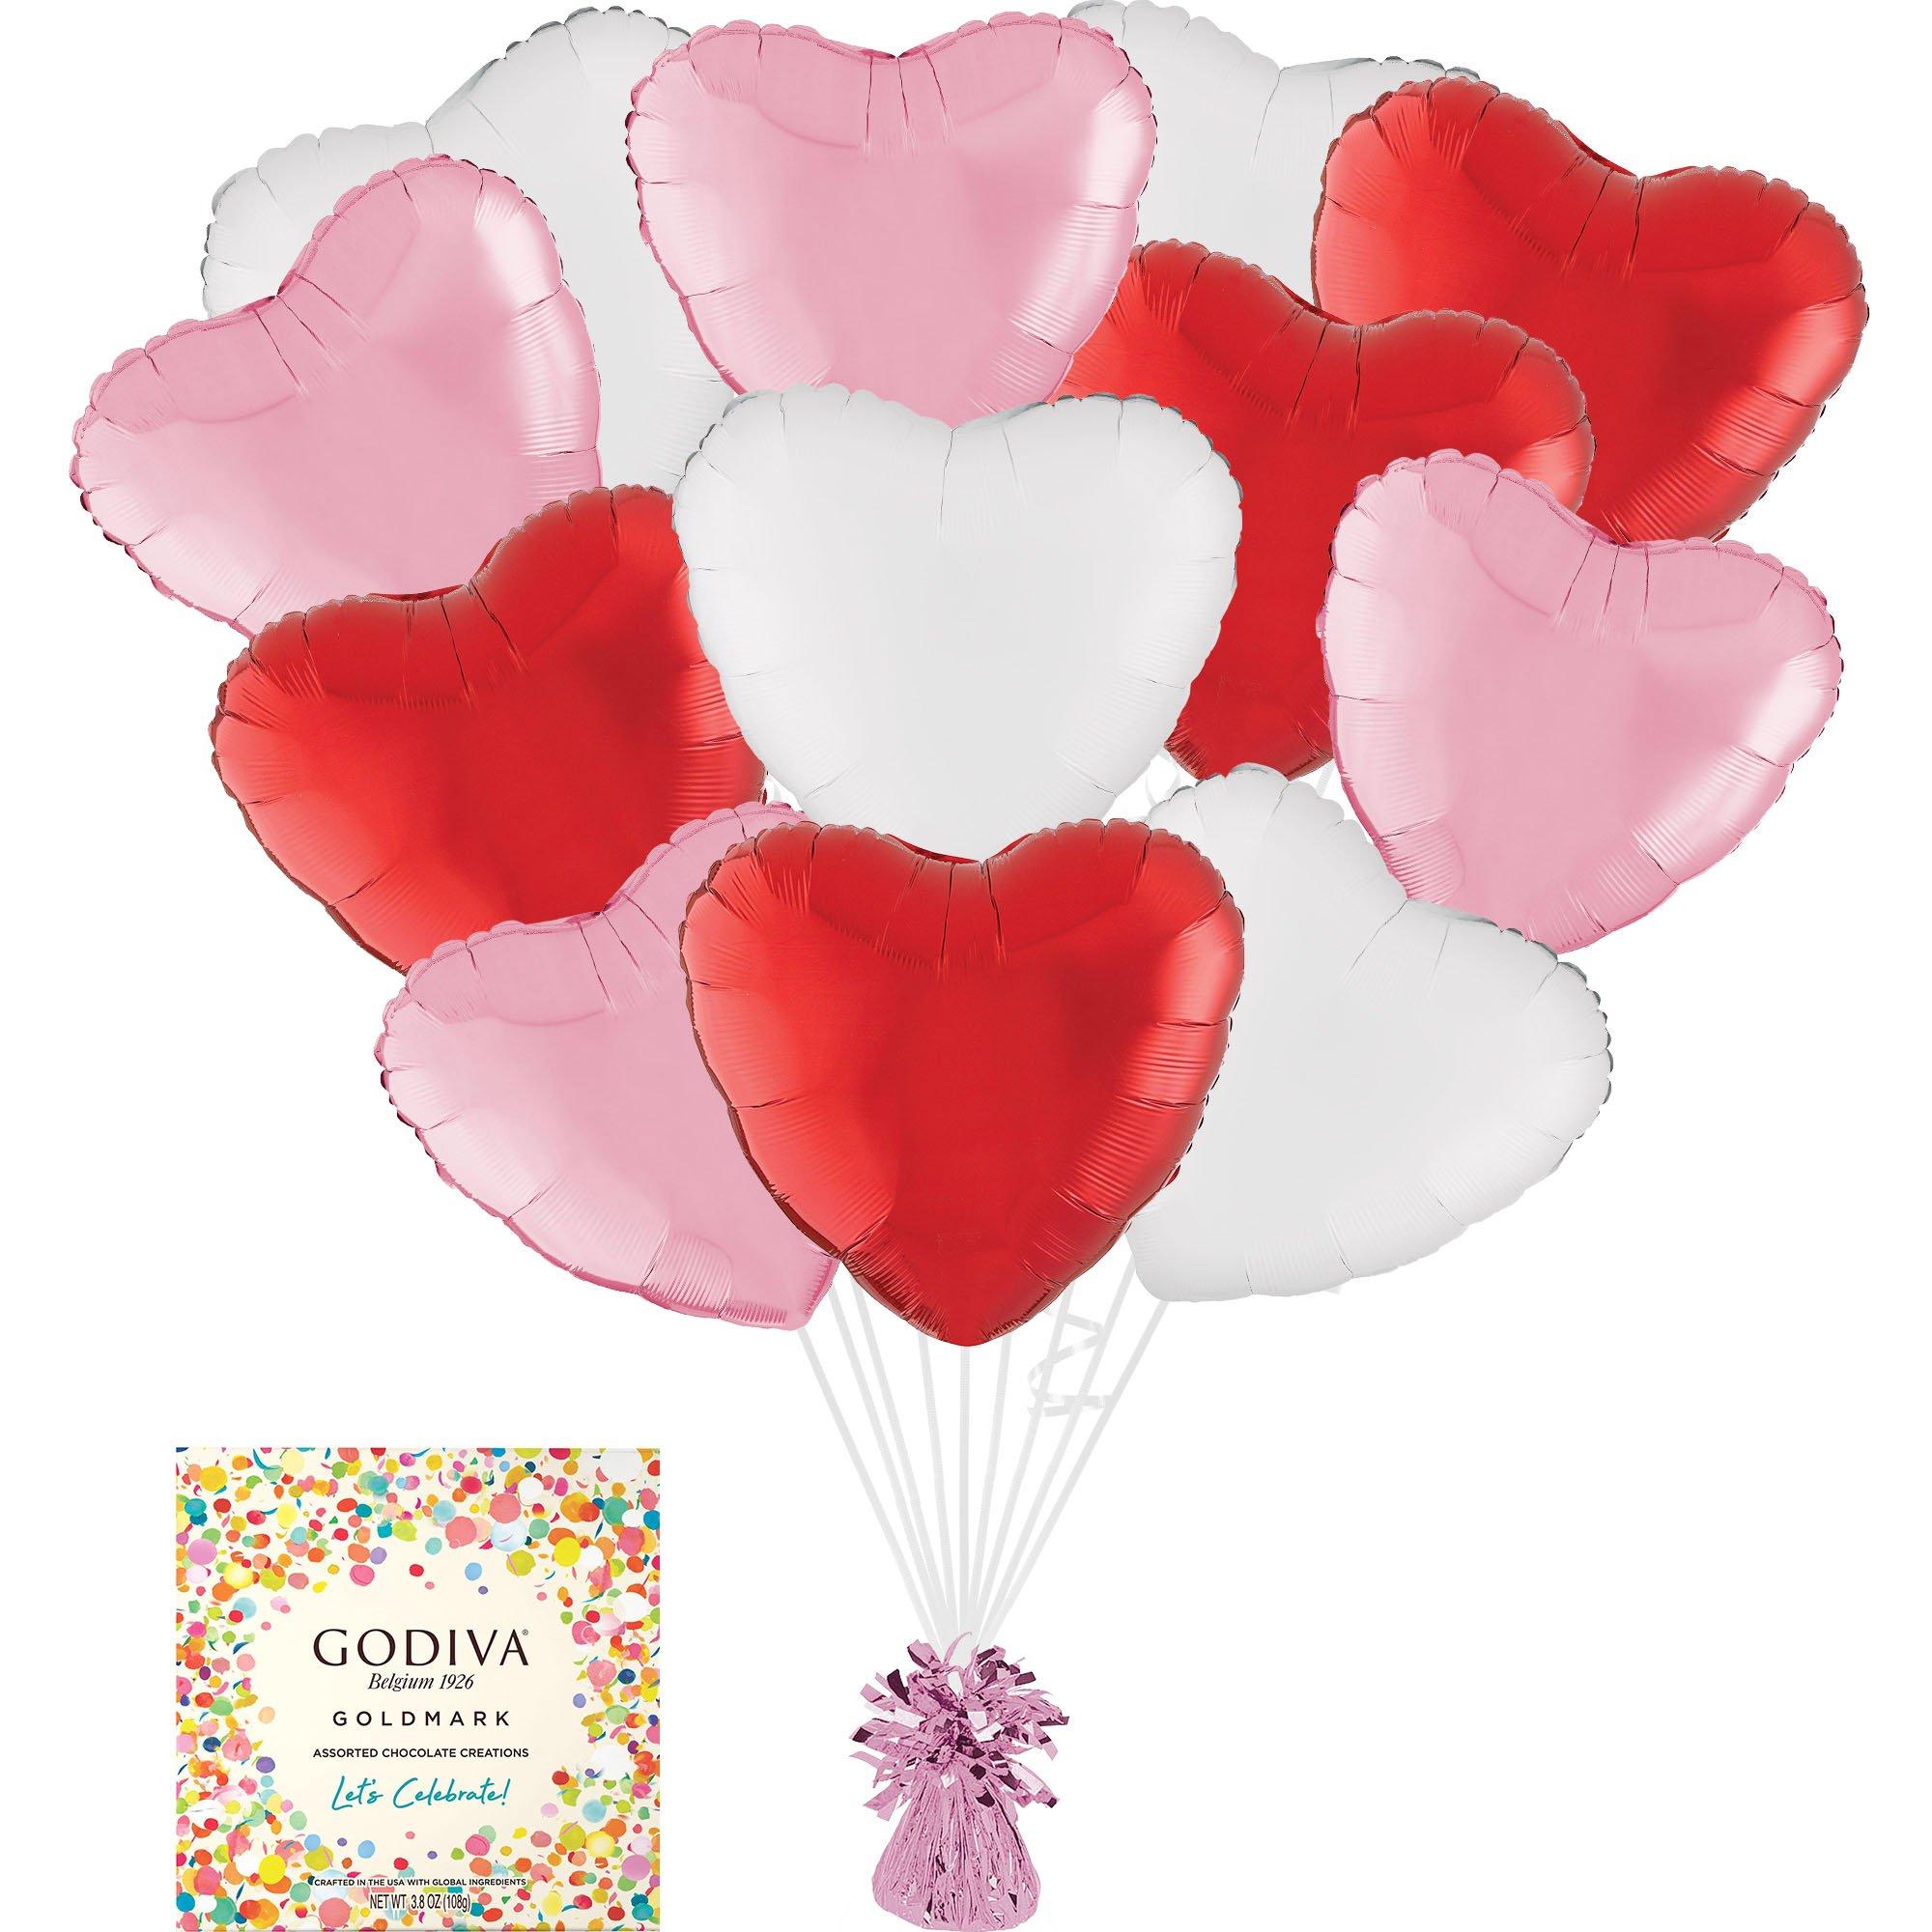 Pink, Red & White Heart Foil Balloon Bouquet with Balloon Weight & Godiva Chocolates - Gift Set